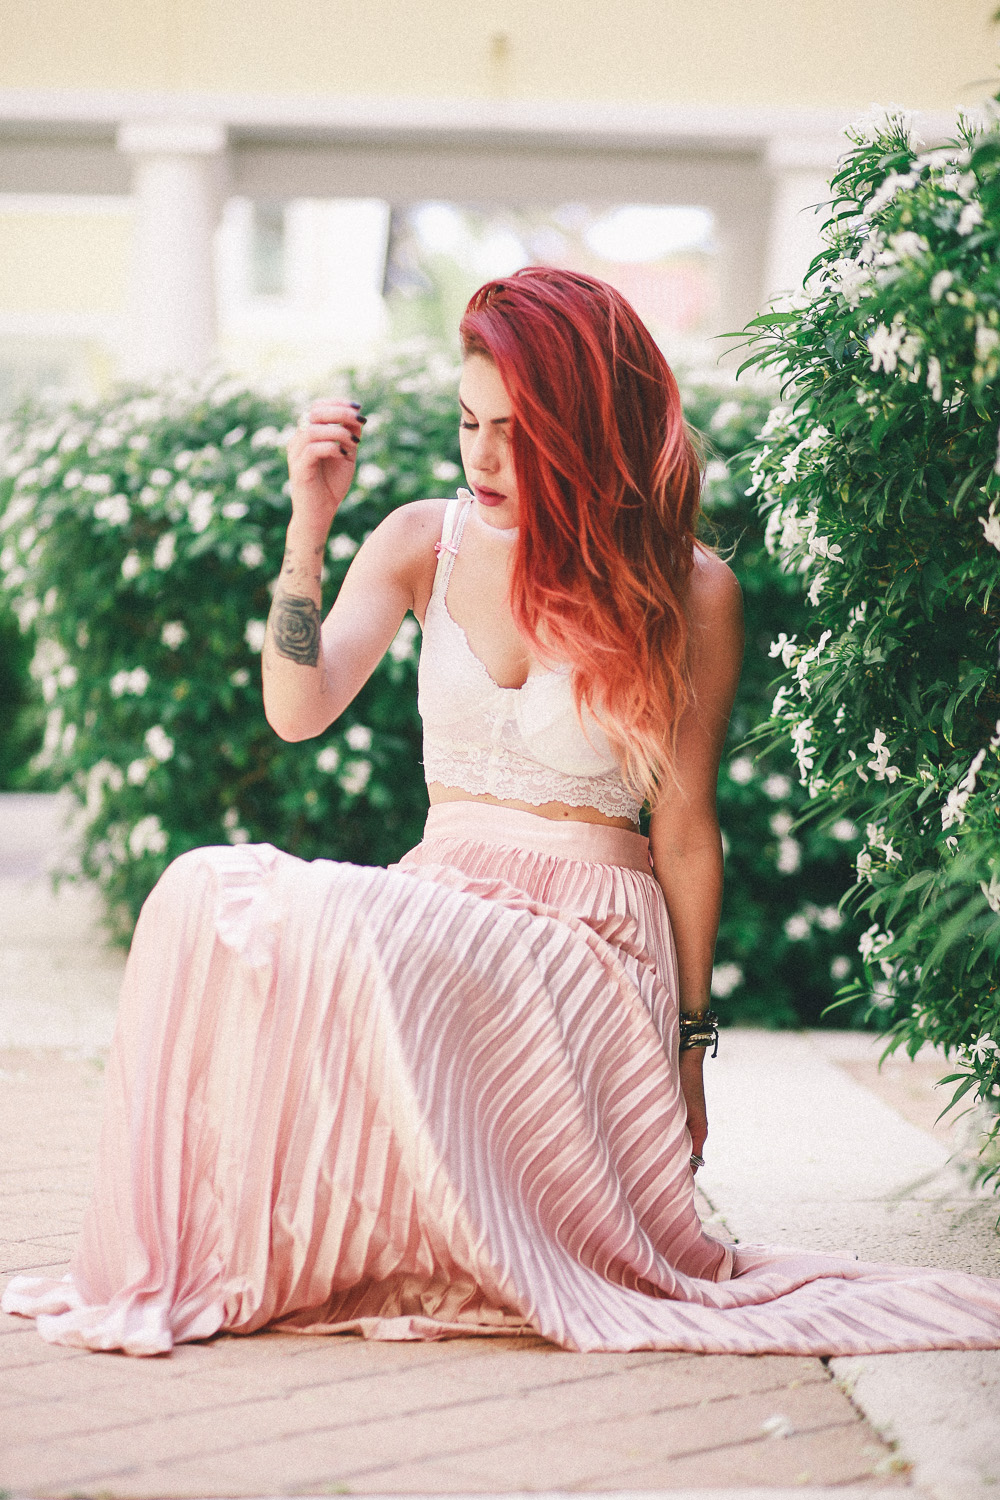 Le Happy wearing pastel pleated skirt and lace bustier